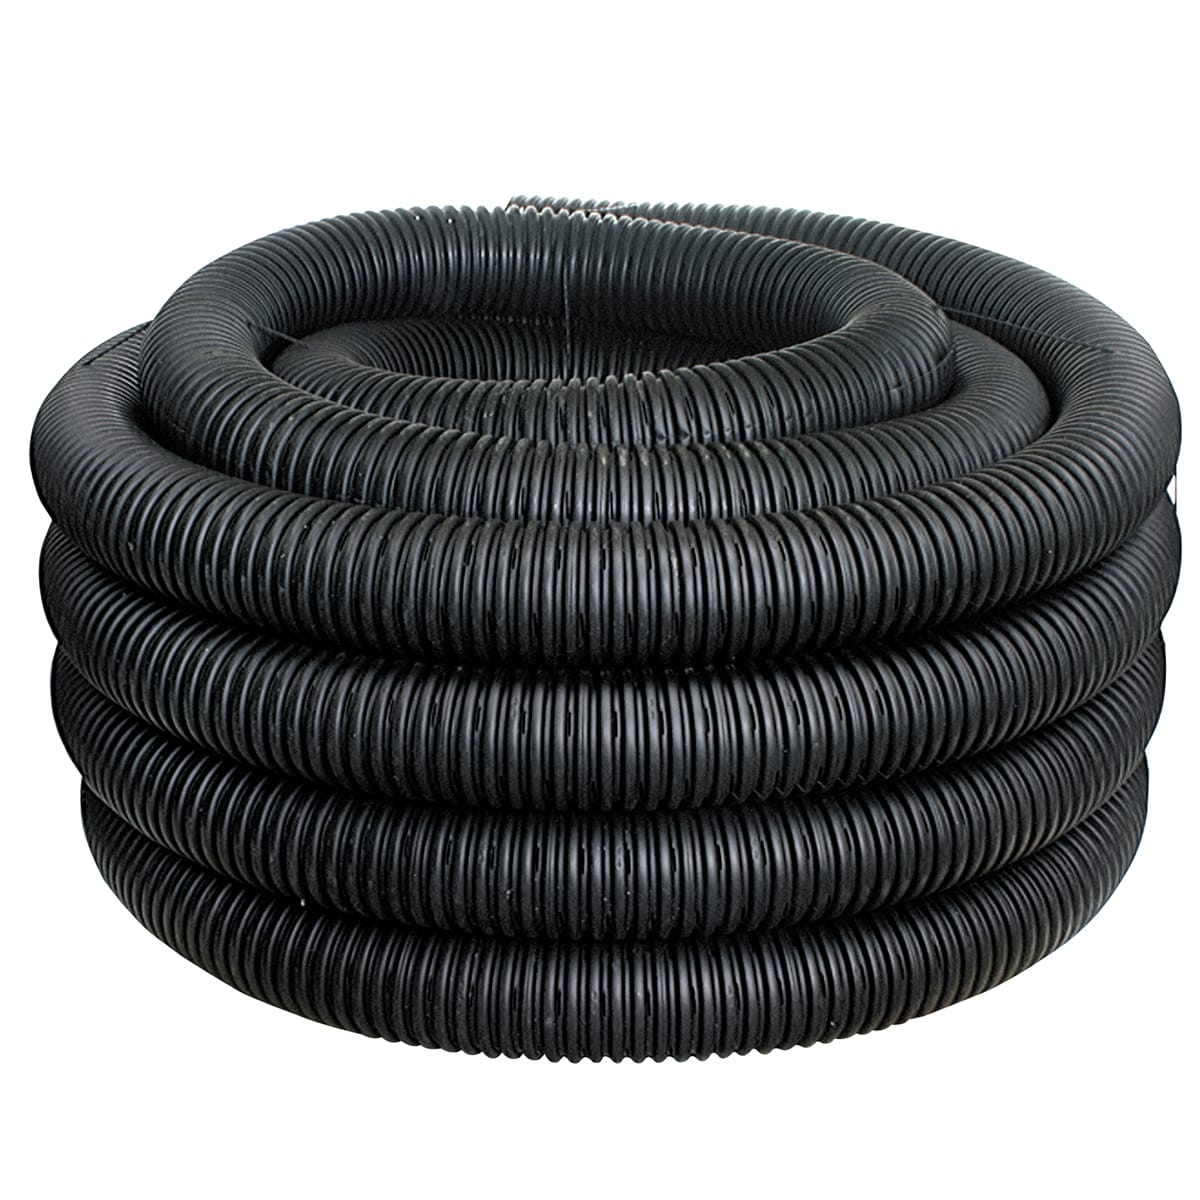 black grid polypipe underground Plastic Gully 4 inch drainage 